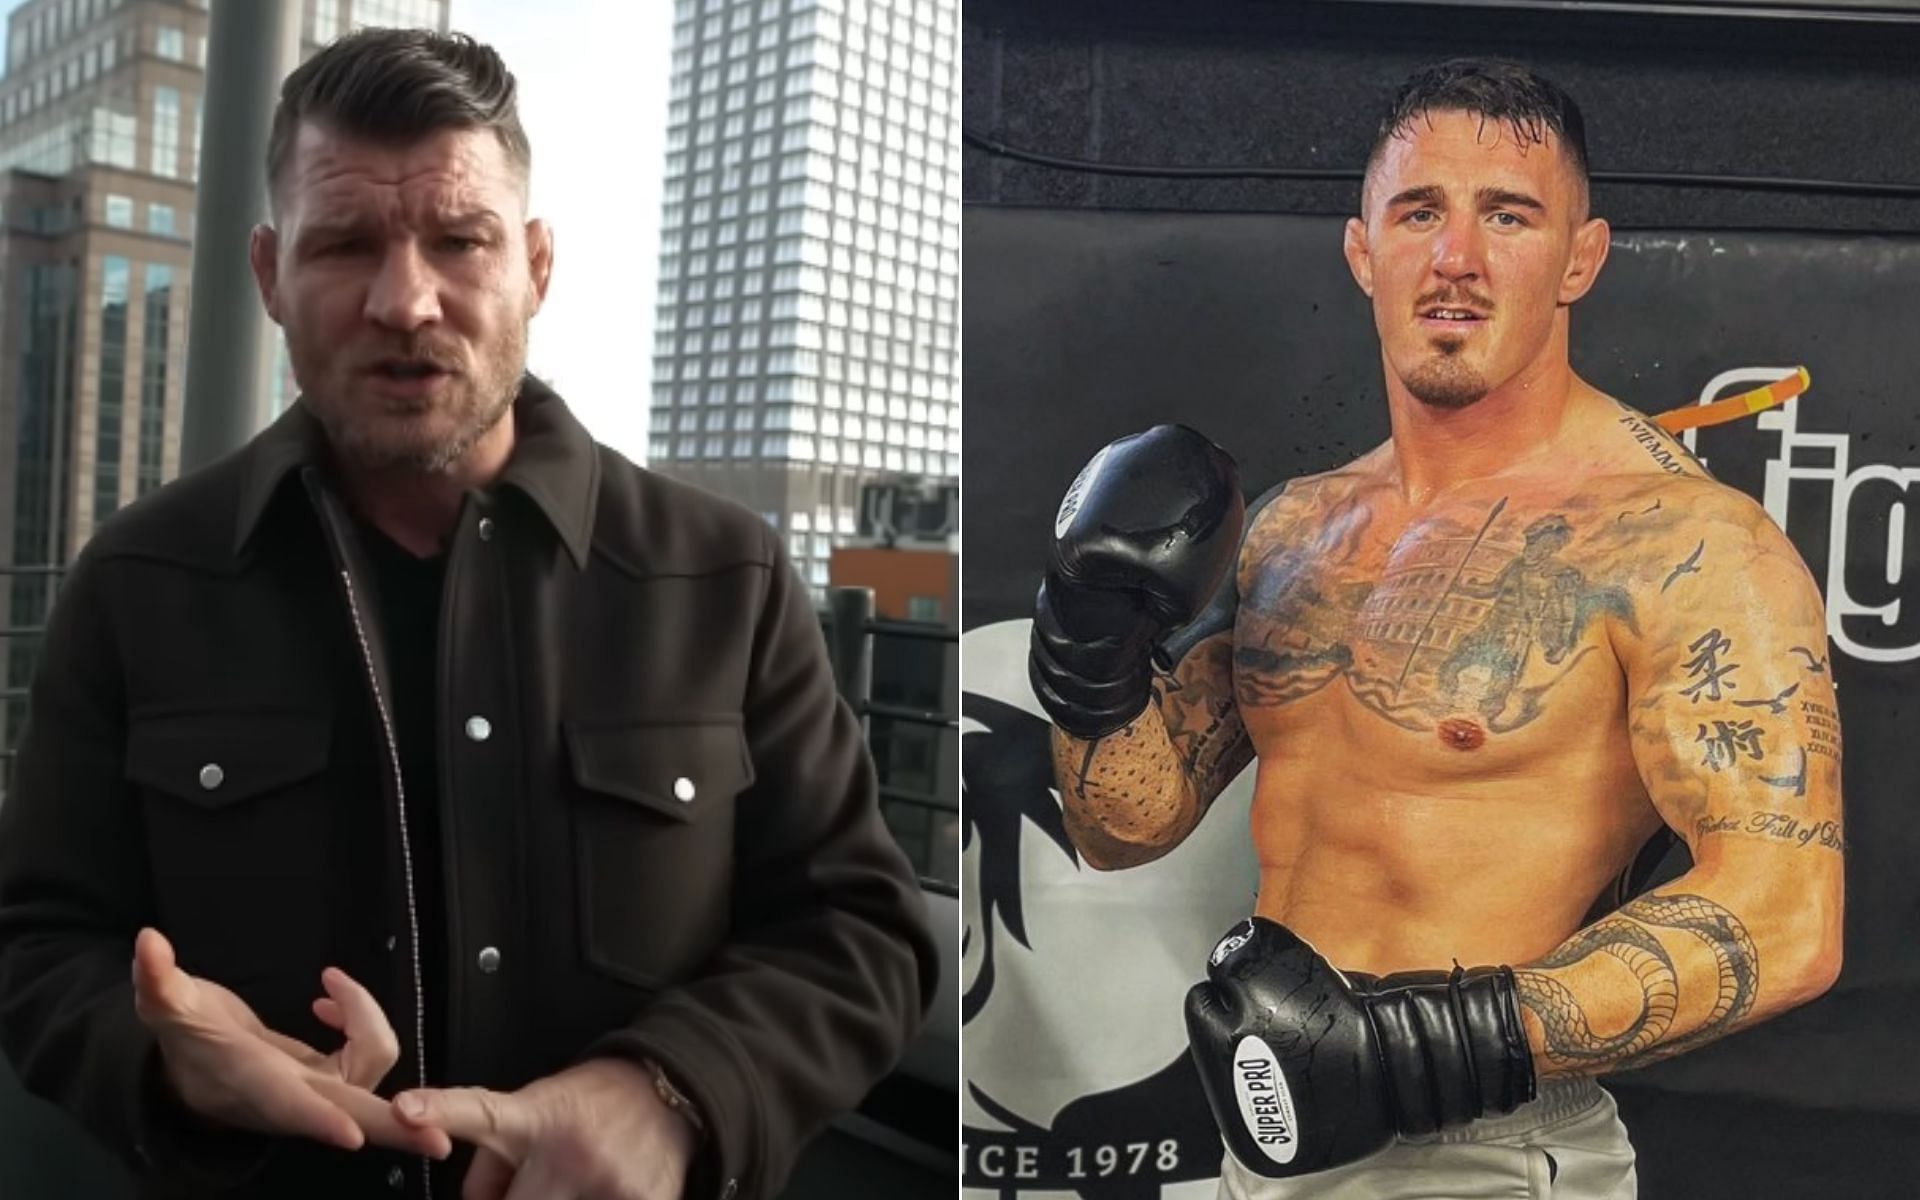 Michael Bisping [Left], and Tom Aspinall [Right] [Photo credit: Michael Bisping - YouTube, and @AspinallMMA - X]